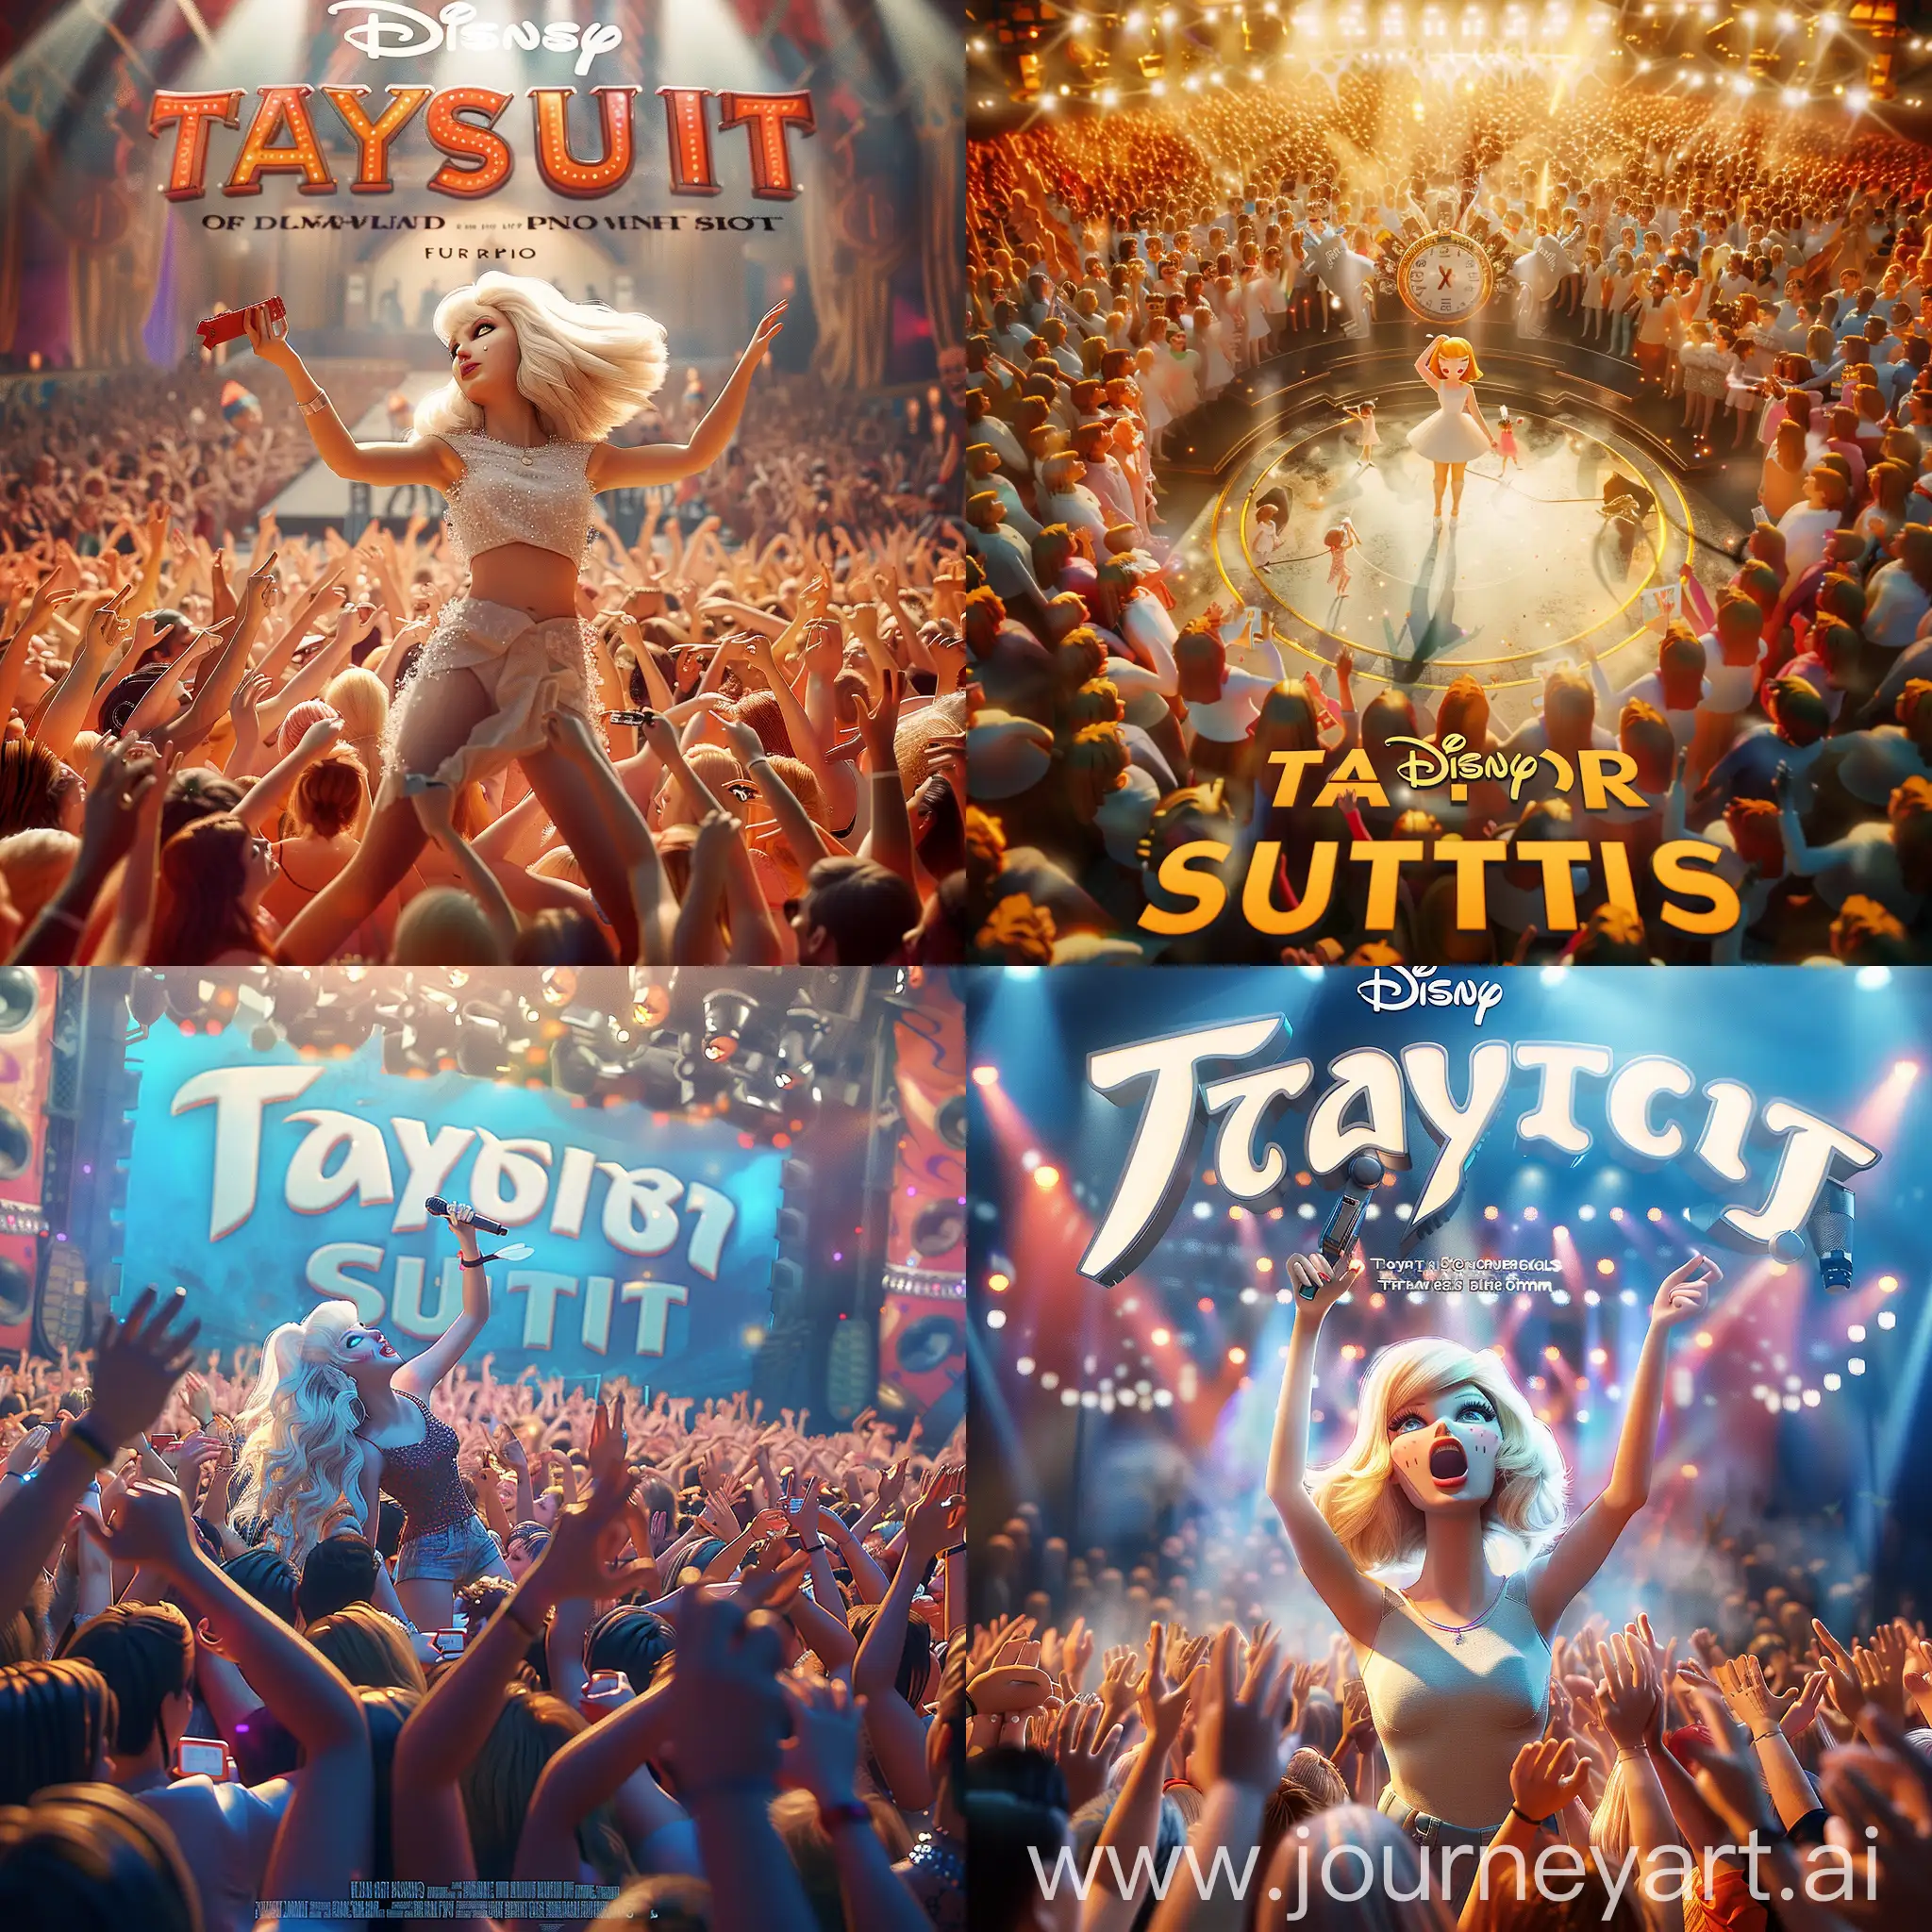 A stunning 3D render of a Disney Pixar movie poster featuring a white, blonde, blue-eyed American girl, Taylor Swift, performing at a massive concert. She is surrounded by a sea of cheering fans, with the movie title "Taylor Swift" prominently displayed. The overall ambiance of the poster is energetic and vibrant, with a touch of magical realism., 3d render, poster